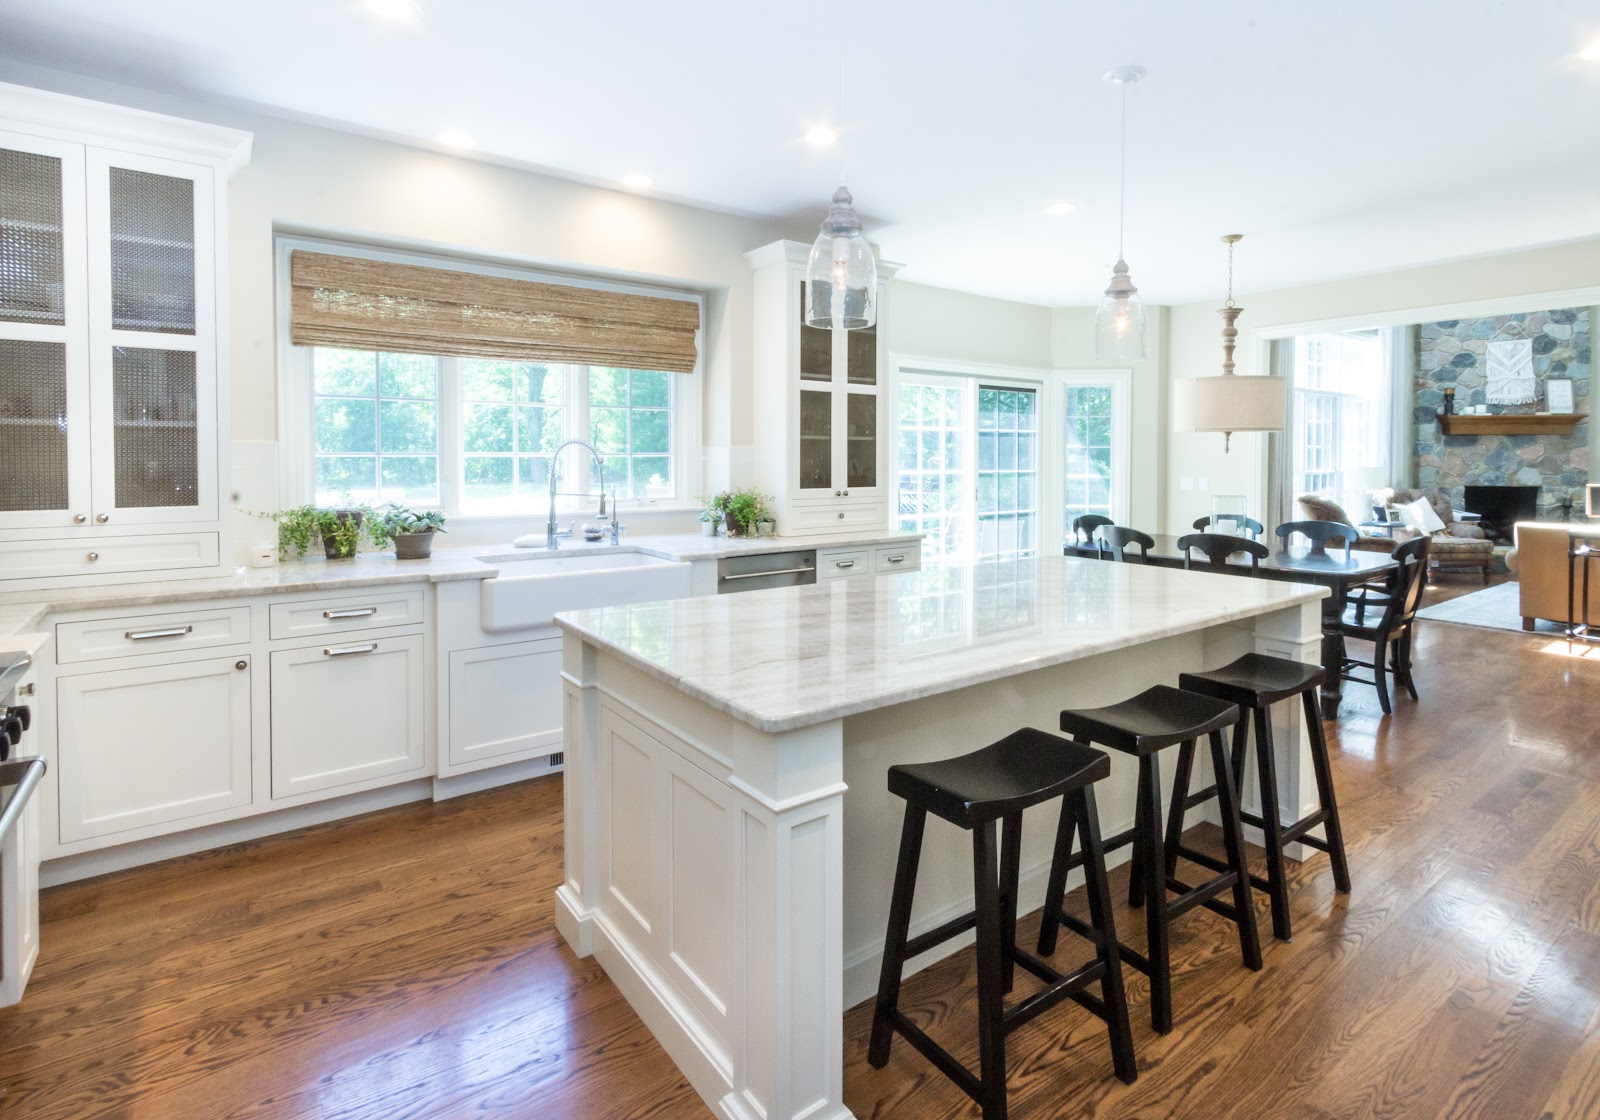 Naturally lit renovated kitchen with white shaker cabinets and glass door display cabinetry, apron sink and eat-in island with quartz countertops.